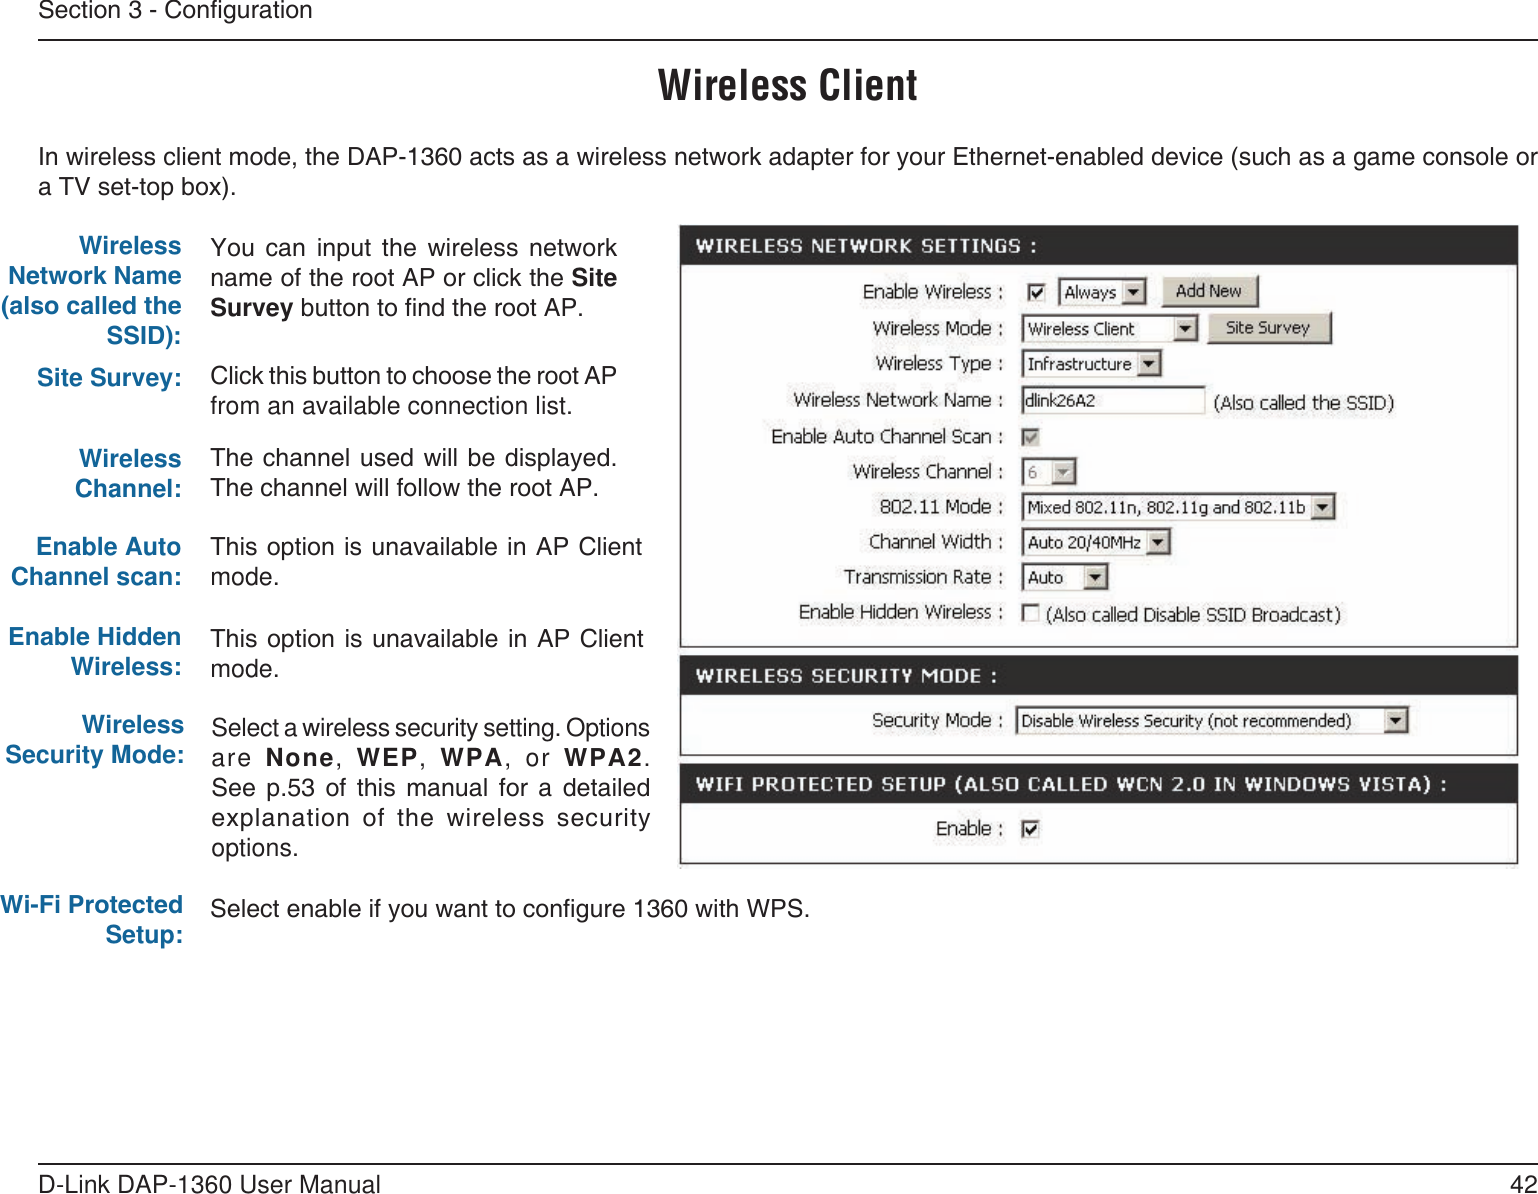 42D-Link DAP-1360 User ManualSection 3 - CongurationYou  can  input  the  wireless  network name of the root AP or click the Site Survey button to nd the root AP.Click this button to choose the root AP from an available connection list.This option is unavailable in AP Client mode.Wireless ClientThis option is unavailable in AP Client mode.Wireless Network Name (also called the SSID):Site Survey:Wireless Channel:Enable Auto Channel scan:Enable Hidden Wireless:The channel used will be displayed. The channel will follow the root AP.In wireless client mode, the DAP-1360 acts as a wireless network adapter for your Ethernet-enabled device (such as a game console or a TV set-top box).Wireless Security Mode: Select a wireless security setting. Options are None, WEP,  WPA,  or WPA2. See  p.53  of  this  manual  for  a  detailed explanation  of  the  wireless  security options.Wi-Fi Protected Setup: Select enable if you want to congure 1360 with WPS.